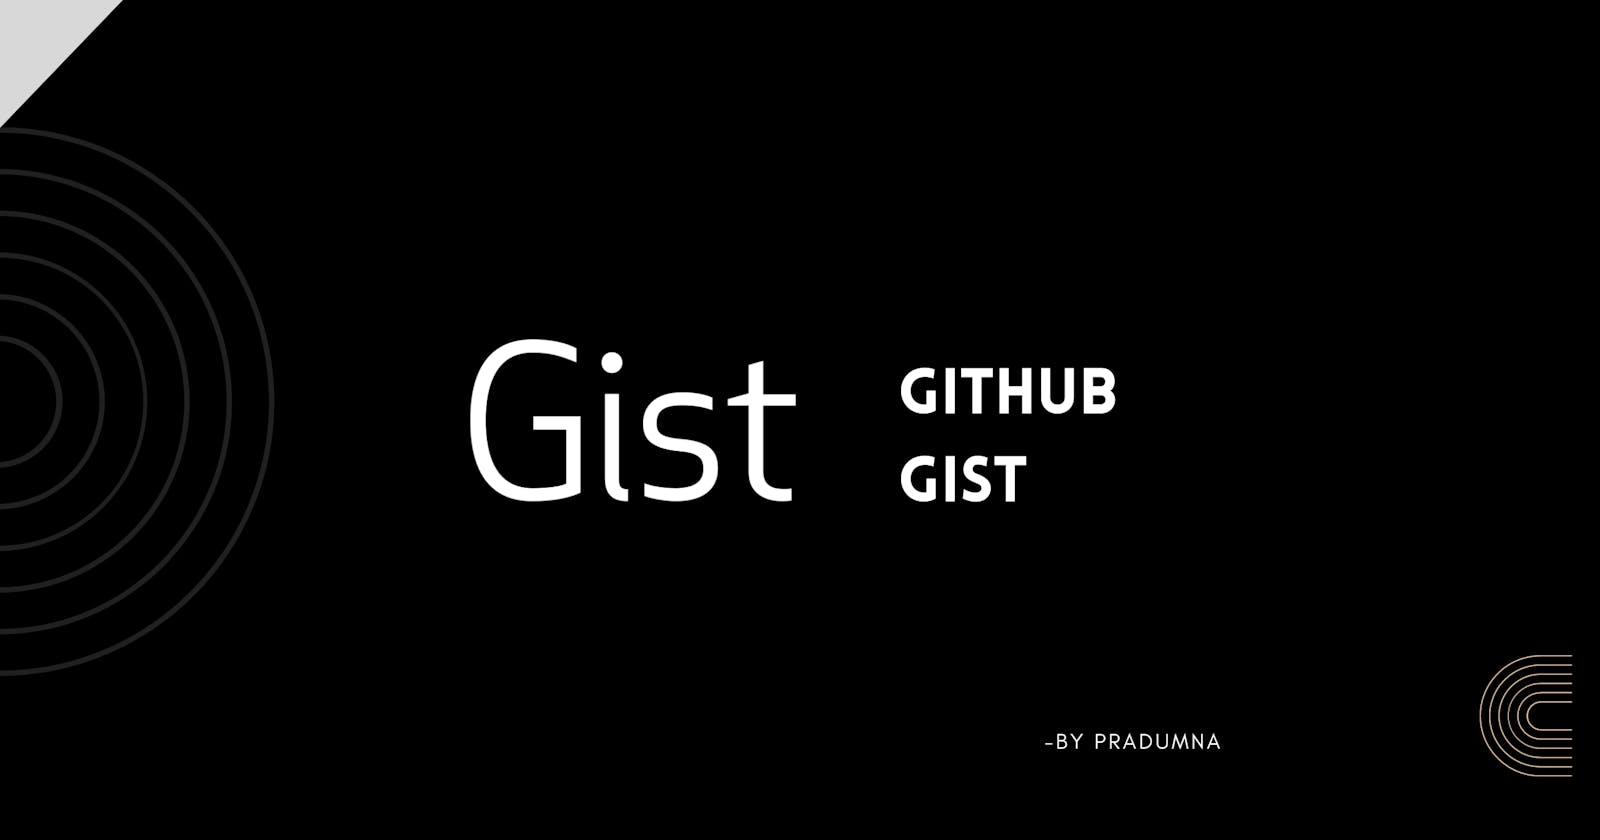 What is a Gist?